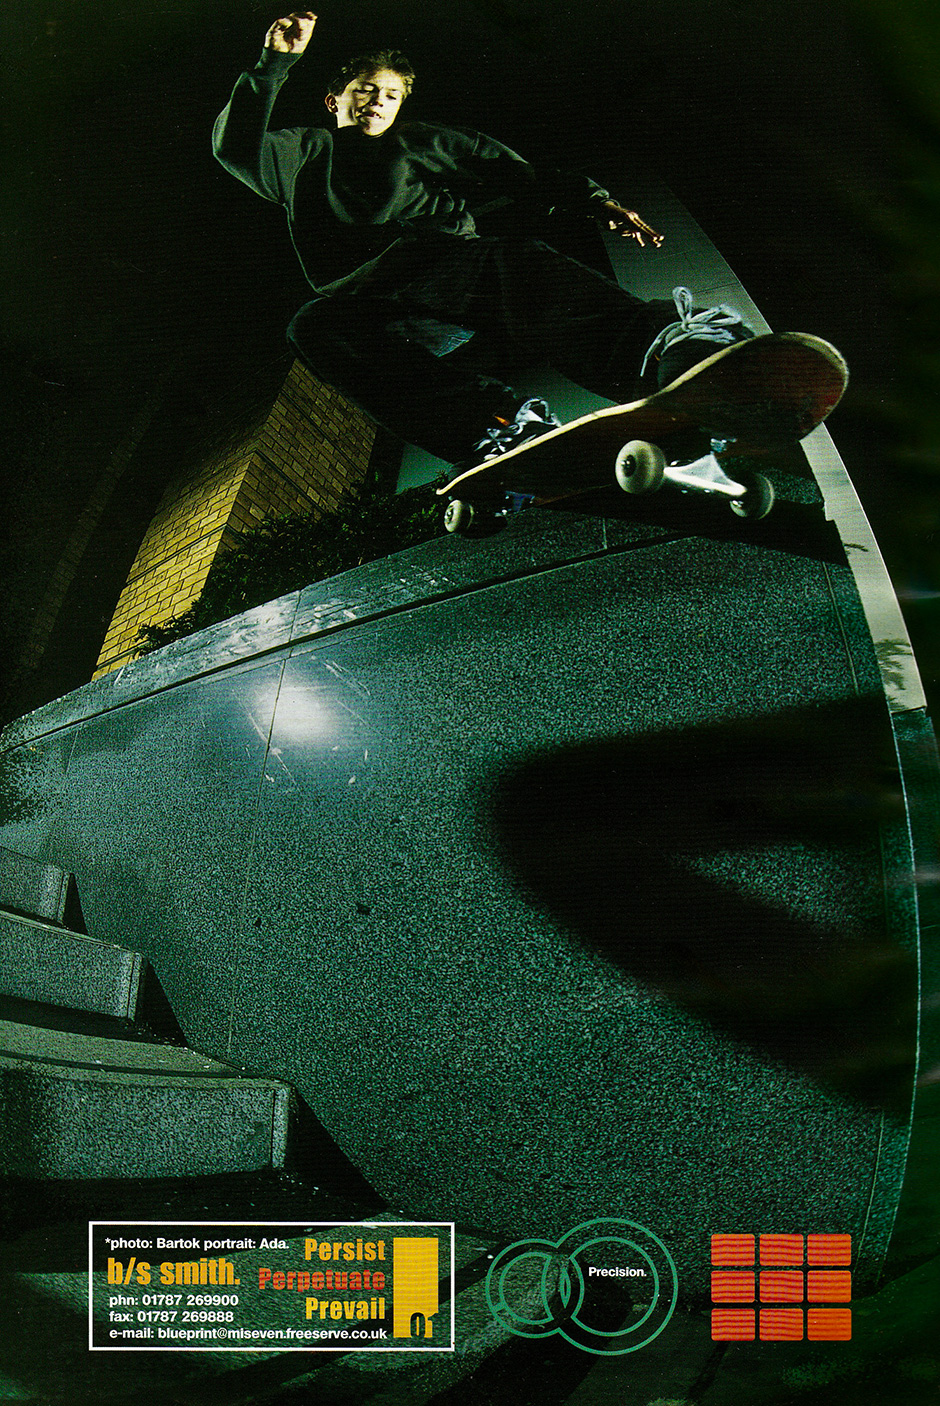 Nick Jensen Backside Smith Grinds the bottom ledge at Knightrider Court for Oliver Barton's lens in 2001. This ran as a Blueprint advert. This was Lev Tanju's photo pick for his 